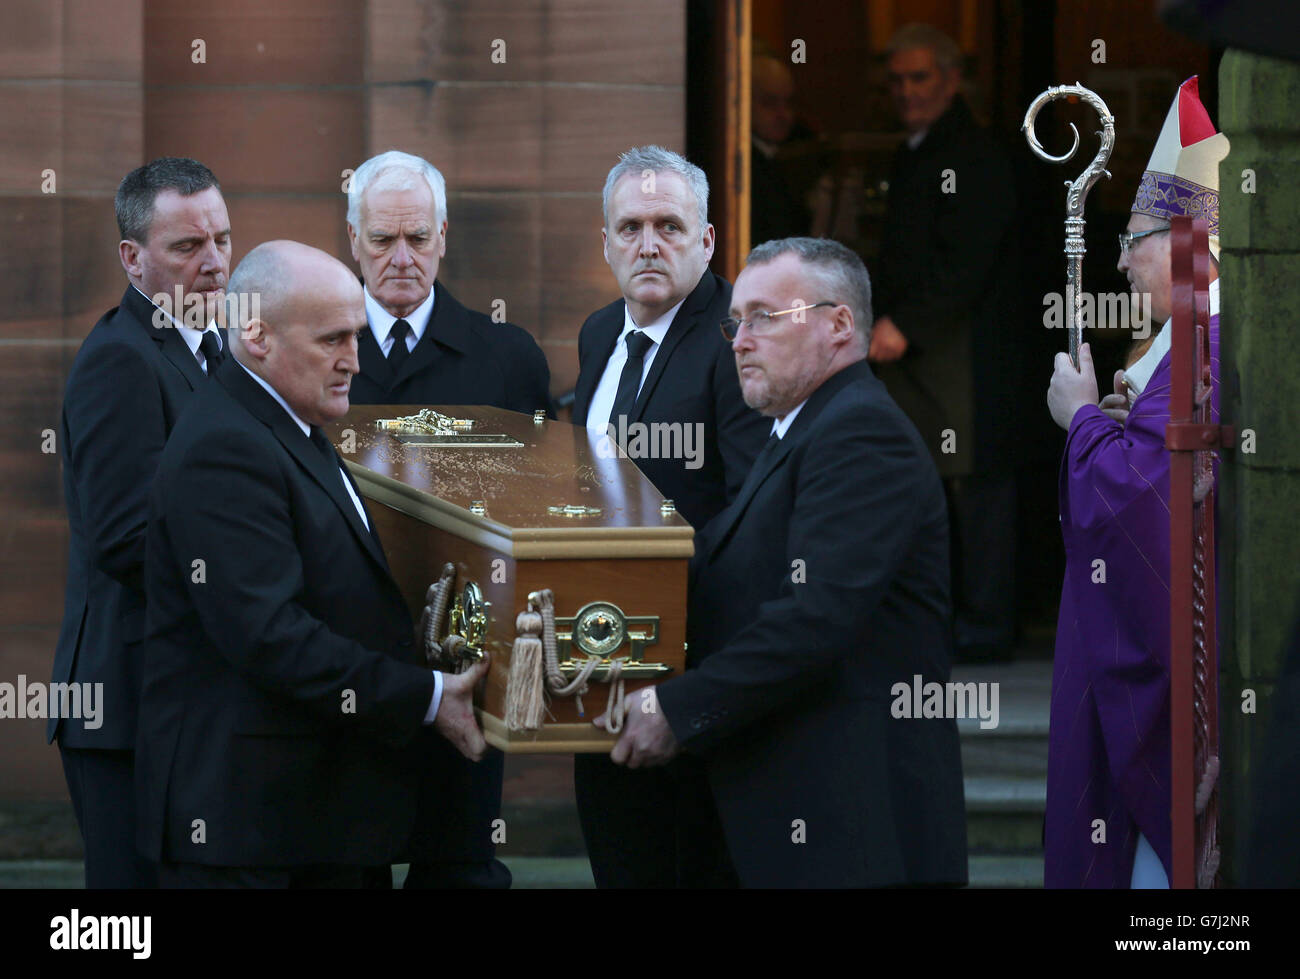 A coffin leaves St Patrick's RC Church in Dumbarton, after the funeral of Erin McQuade, 18 and her grandparents Jack Sweeney, 68 and Lorraine Sweeney, 69, who all died when the out-of-control refuse vehicle ploughed into pedestrians in Glasgow's George Square three days before Christmas. Stock Photo